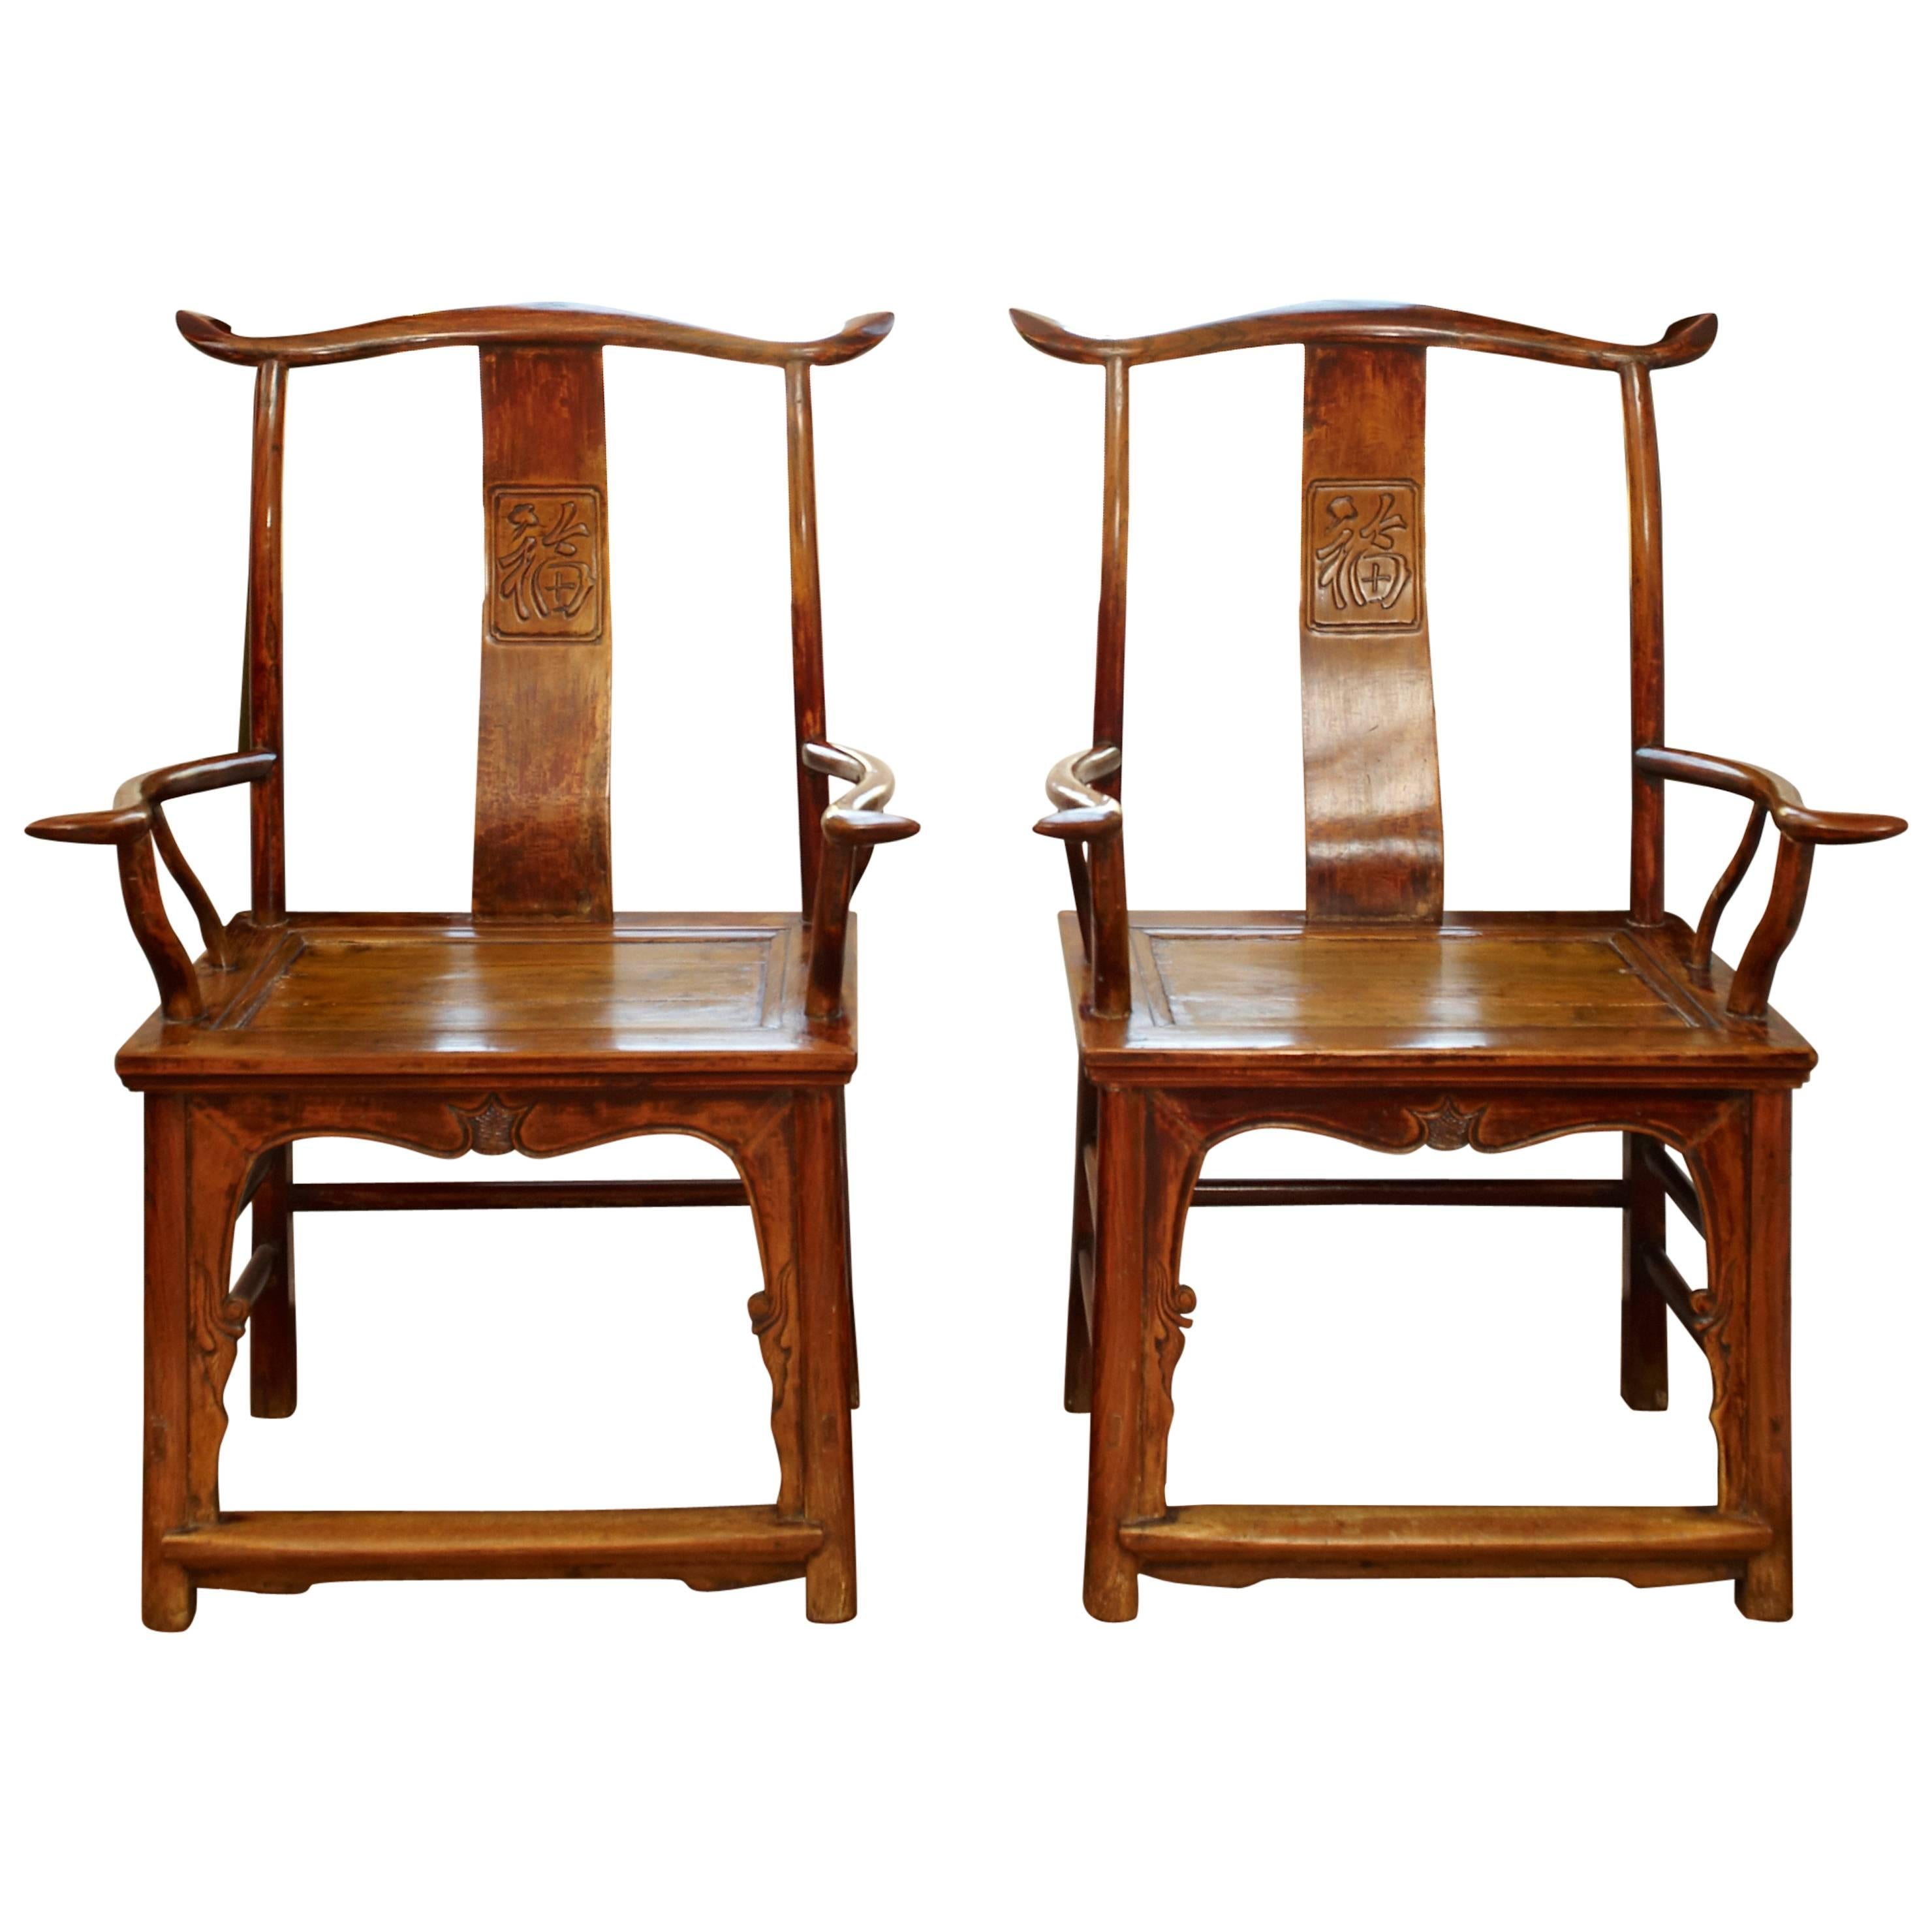 Pair of Elmwood 'Official's Hat' Yoke Back Armchairs, Guanmaoyi